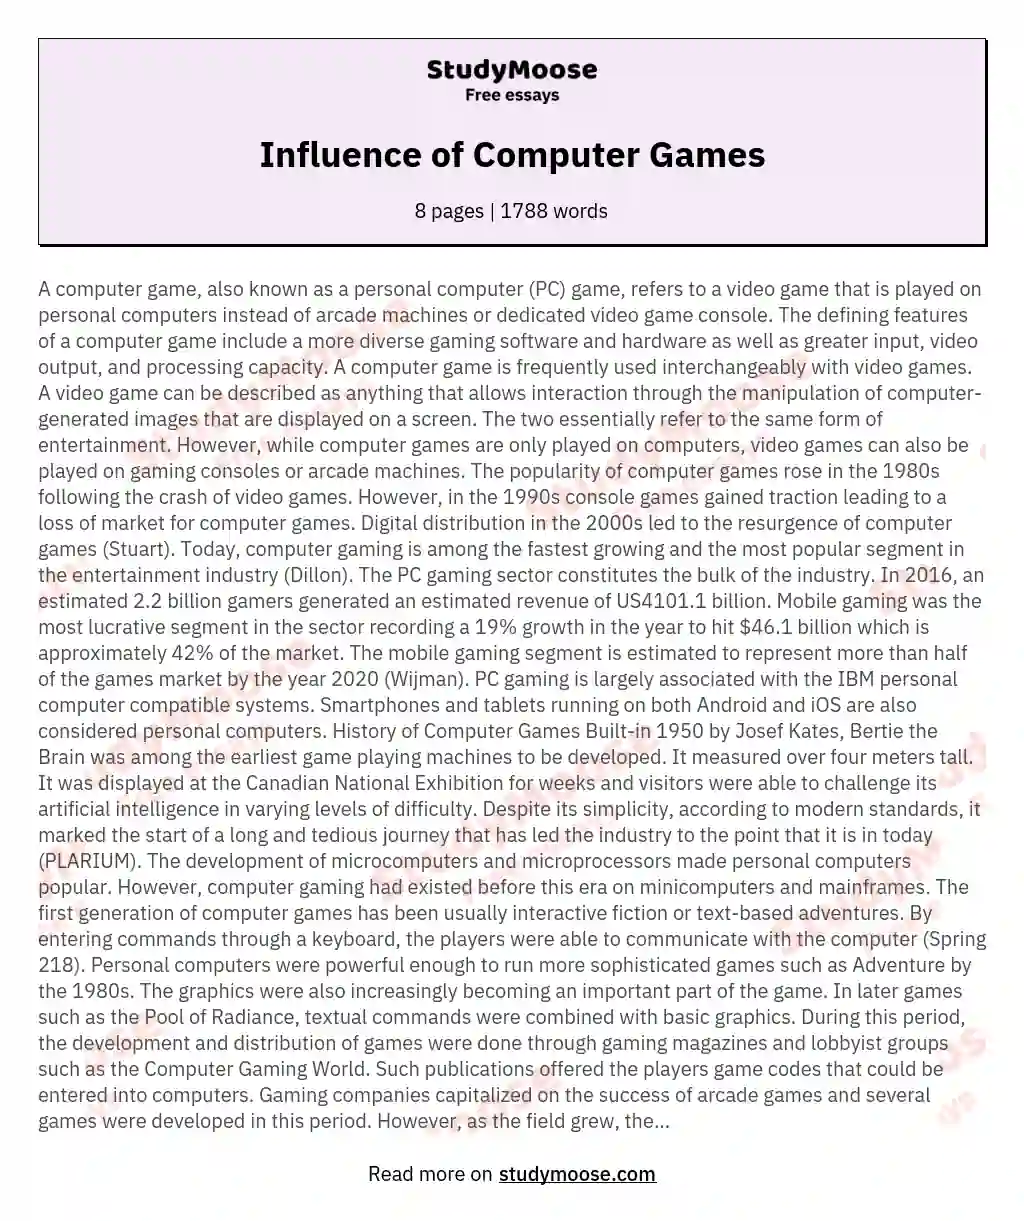 Influence of Computer Games essay